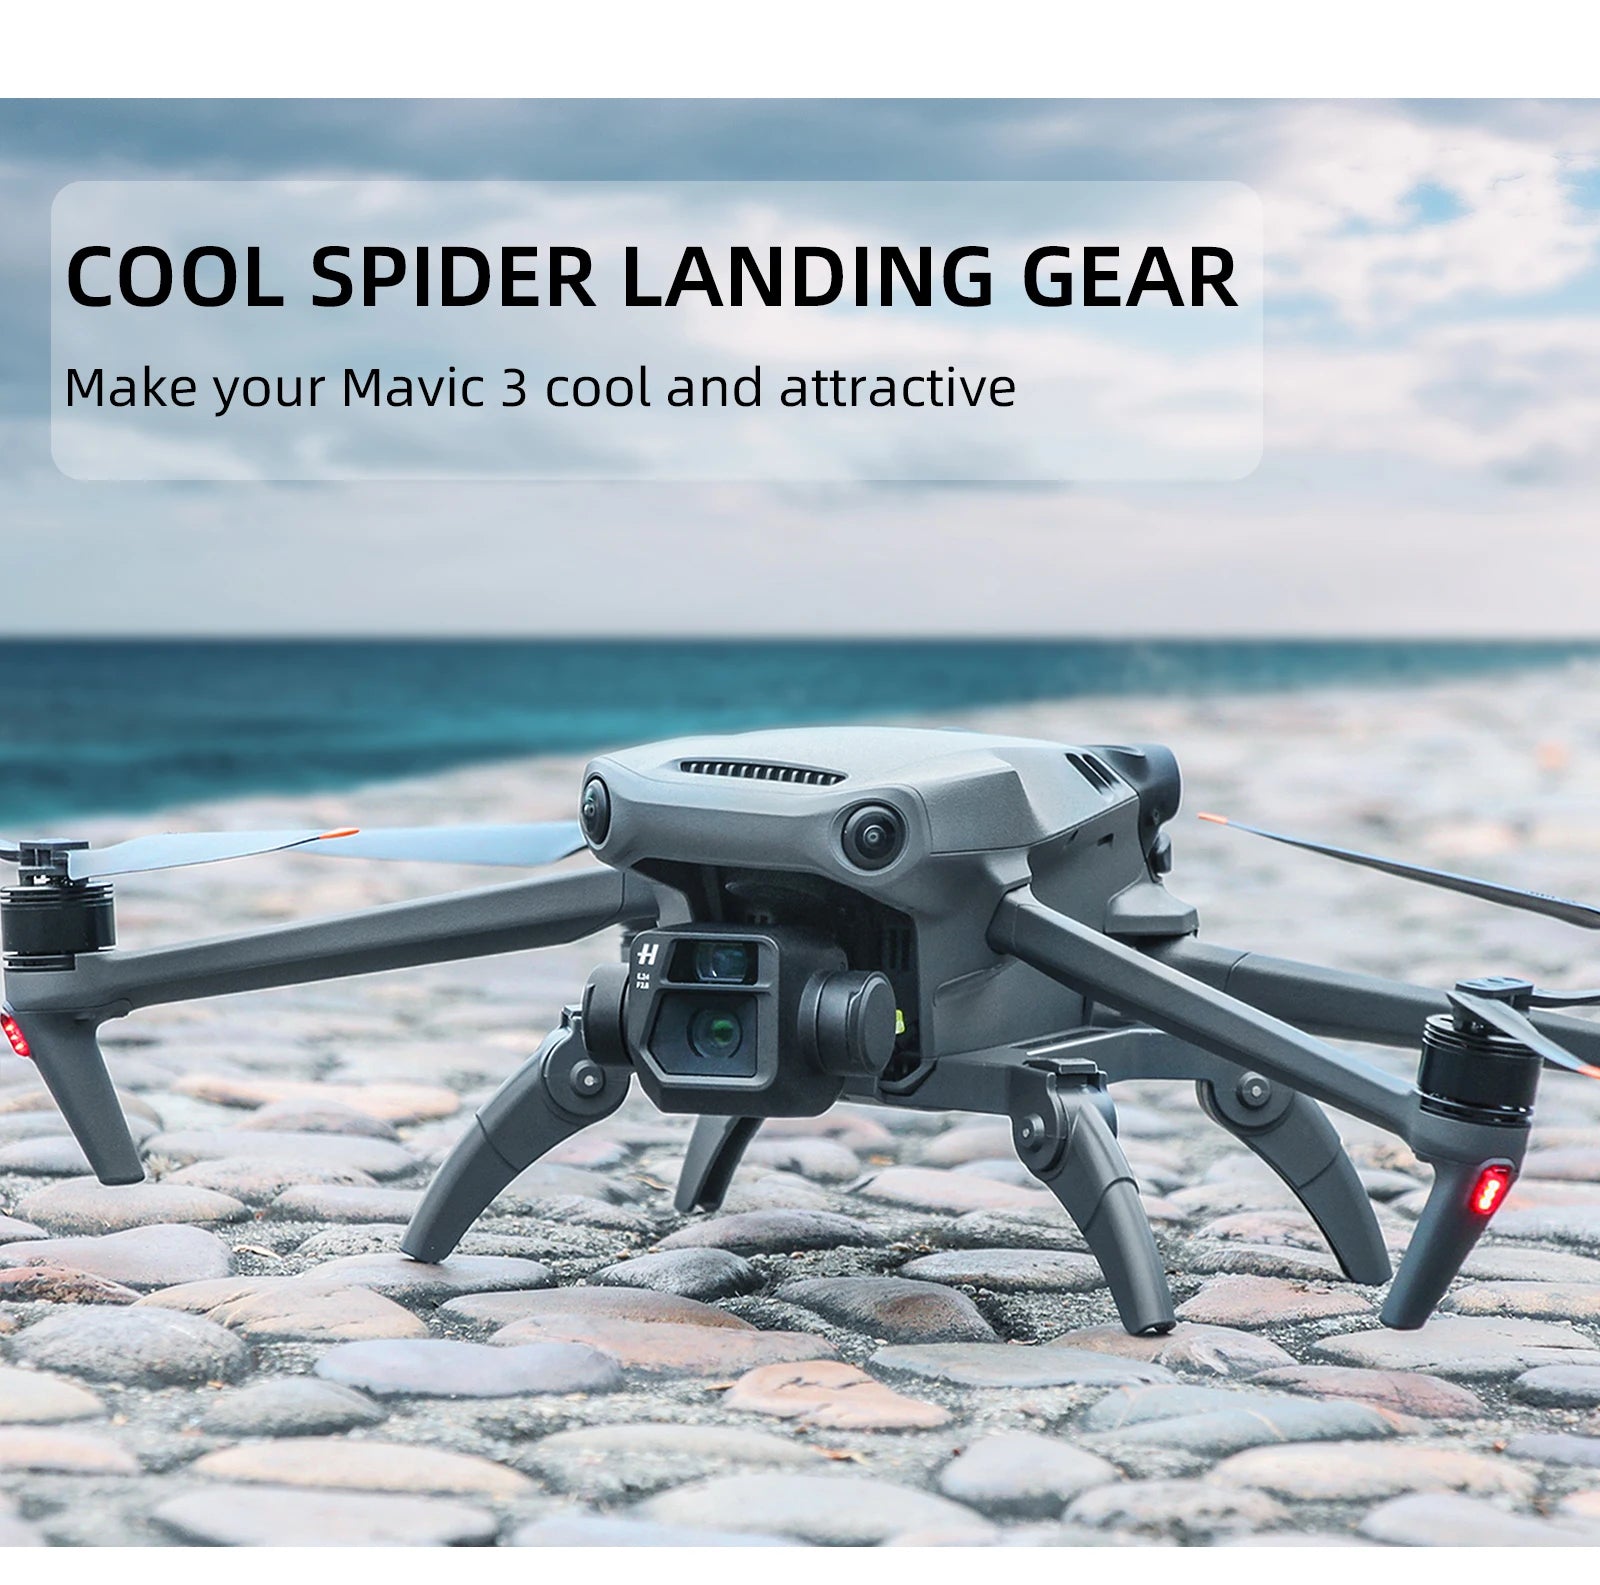 COOL SPIDER LANDING GEAR Make your Mavic 3 cool and attractive 